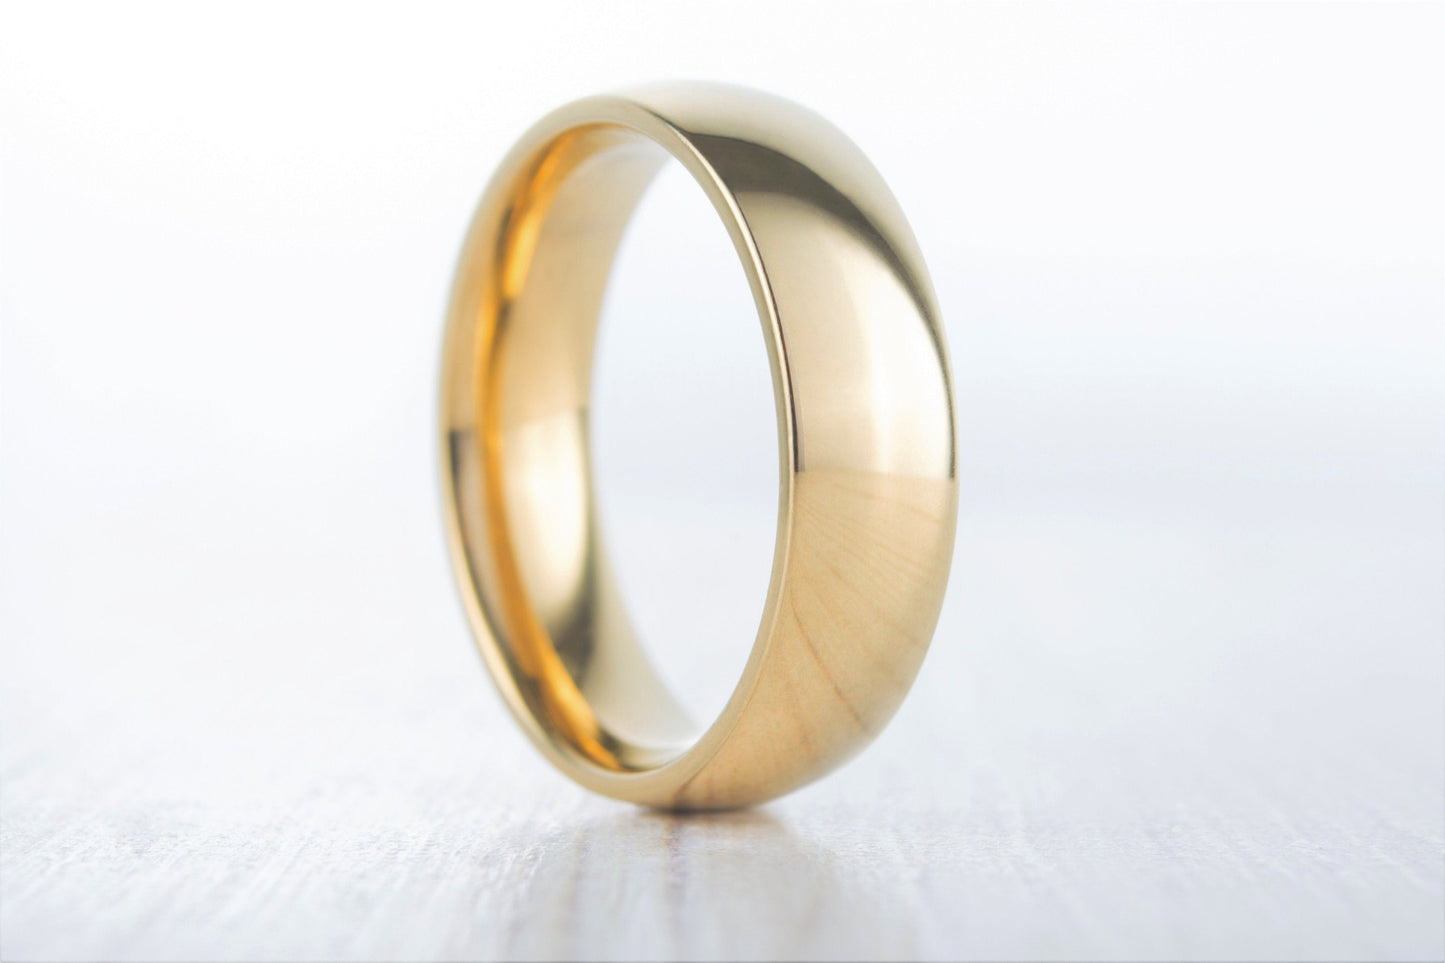 8mm Wide, filled 18ct Yellow gold Plain Wedding band Ring - gold ring